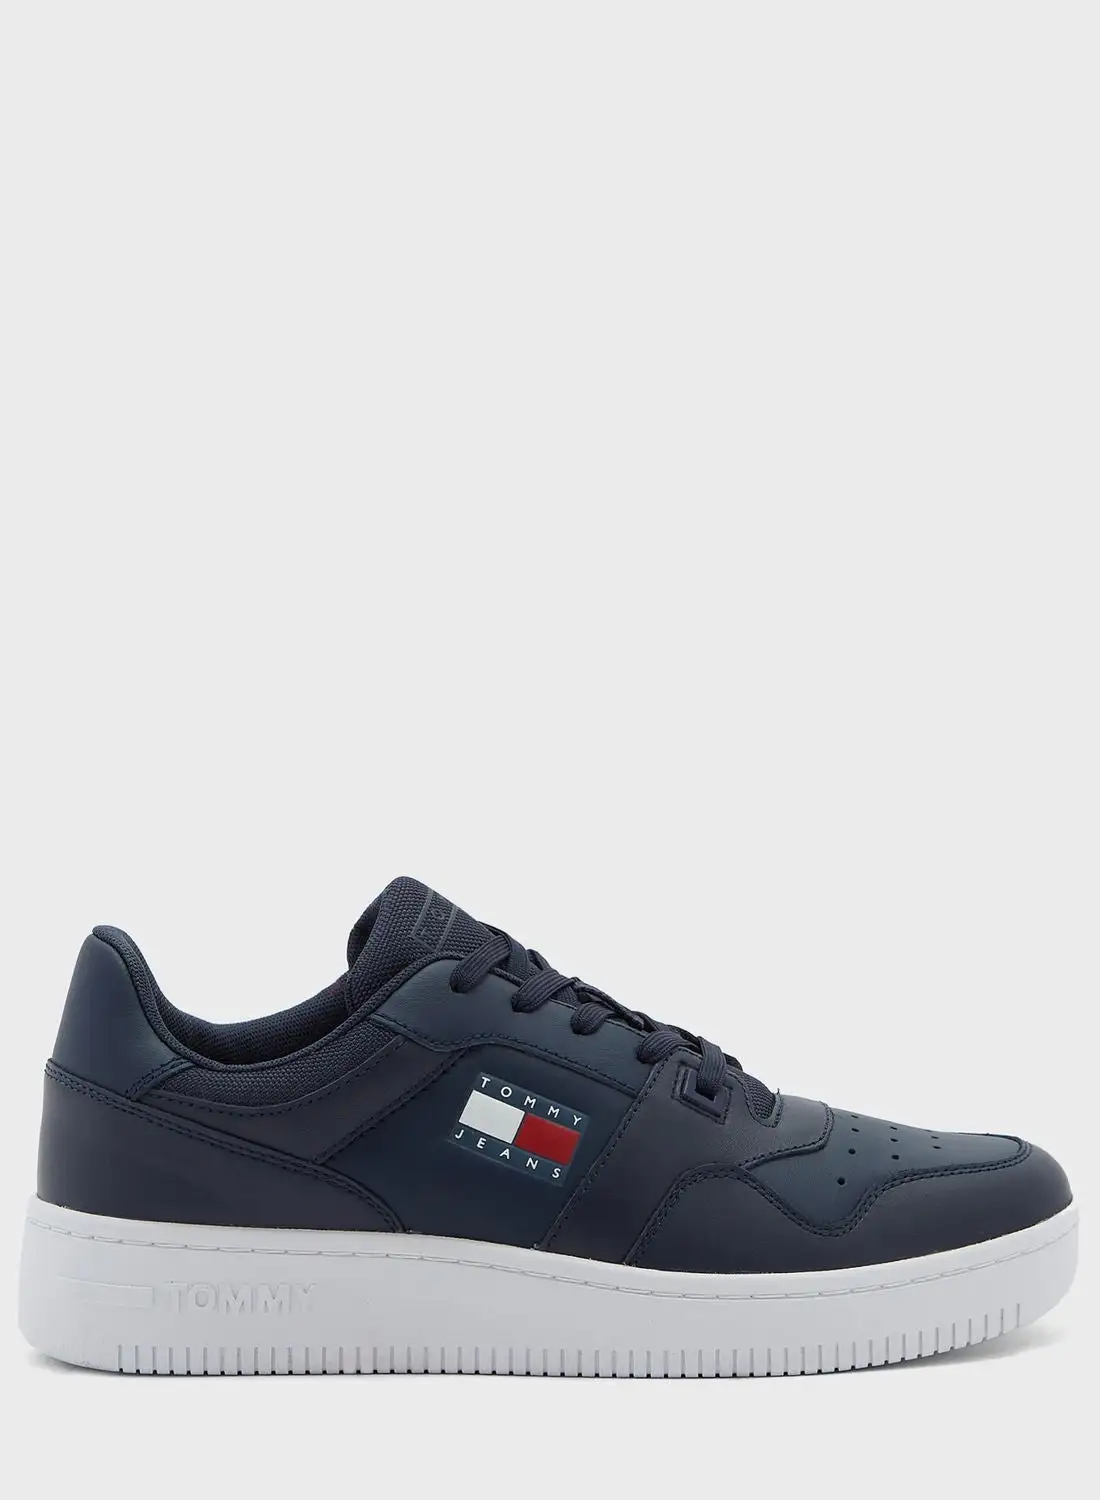 TOMMY JEANS Retro Evolve Low Top Sneakers